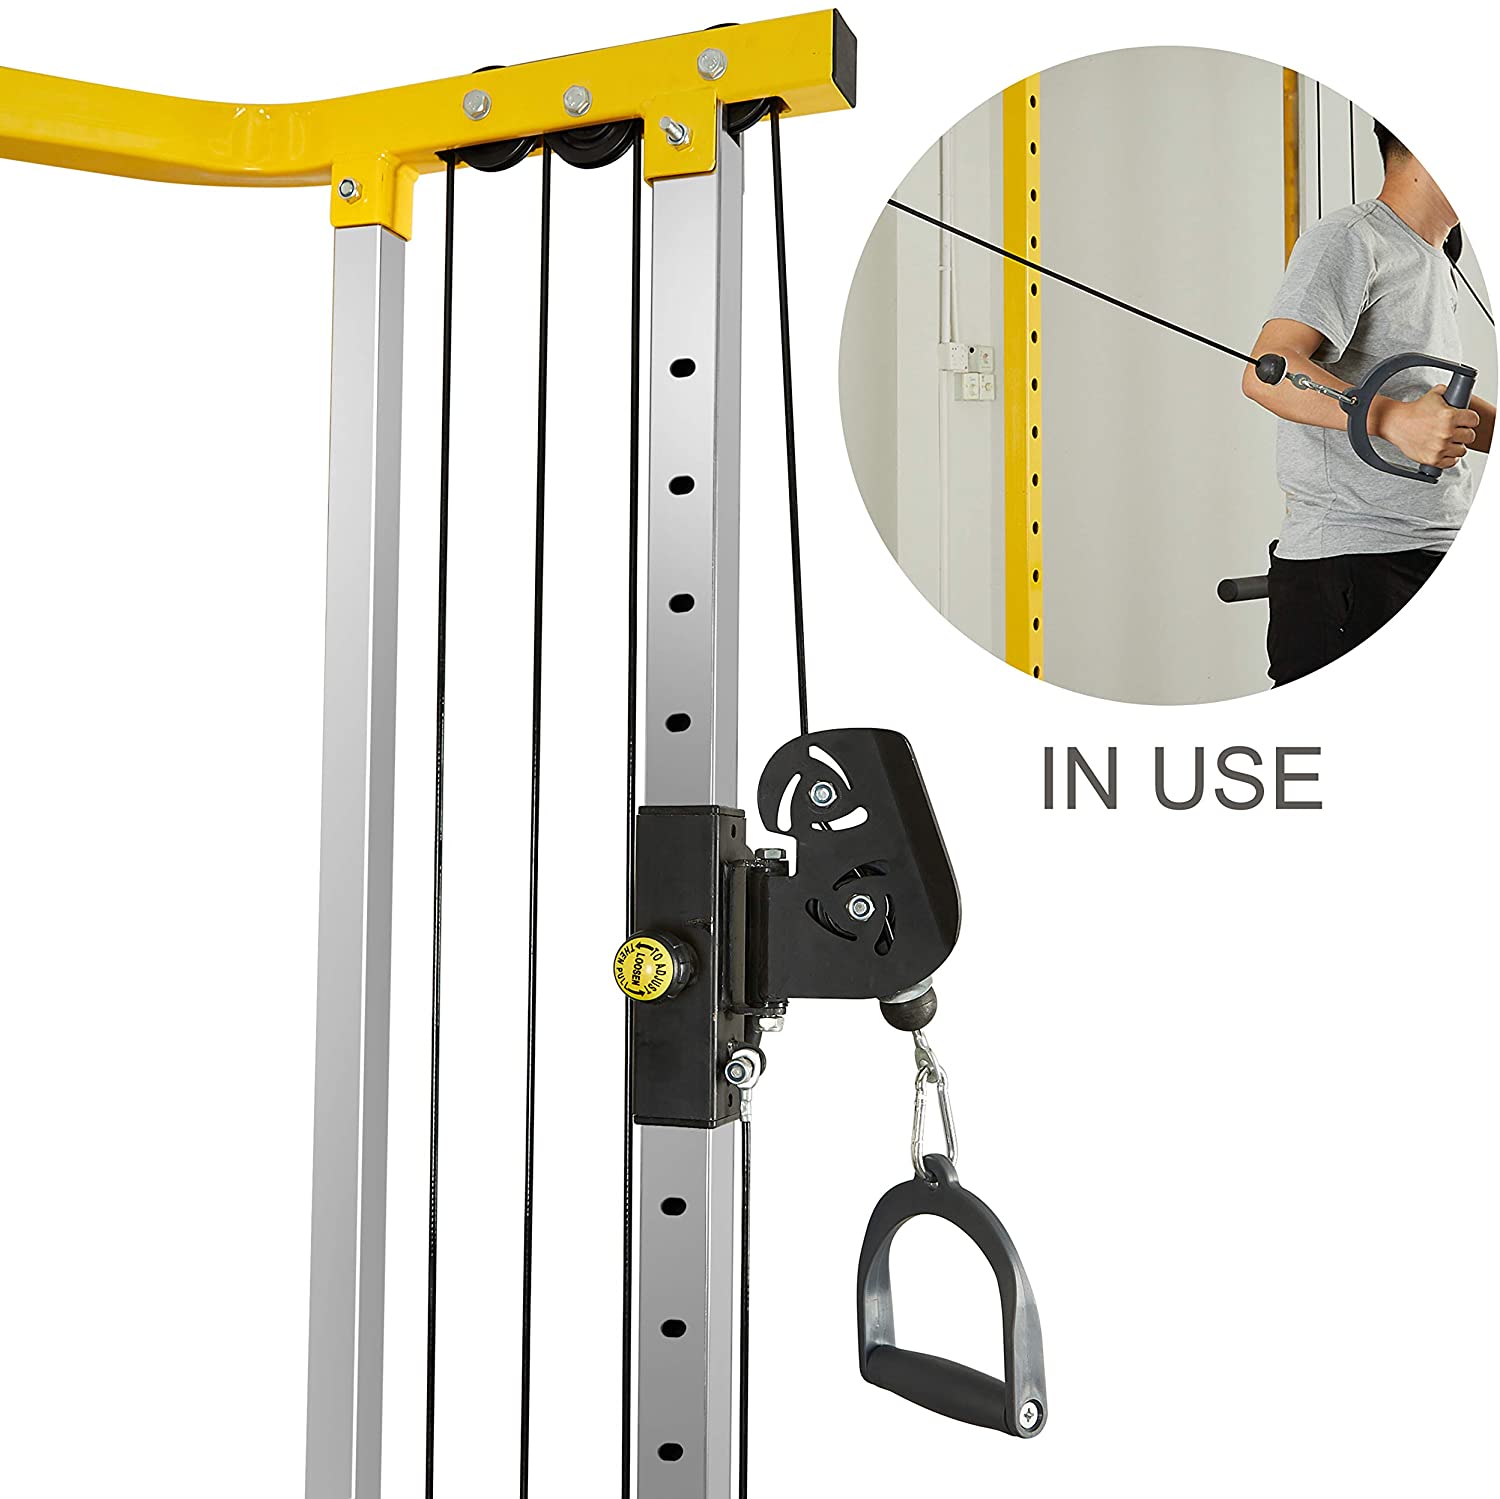 Gym; Home Gym; Garage Gym; Sports; Workout; Exercise; Exercise Equipment; Fitness; Attachments; Power Cage; Power Rack; Cable Machine; Cable Attachments; Cable Crossover Attachment